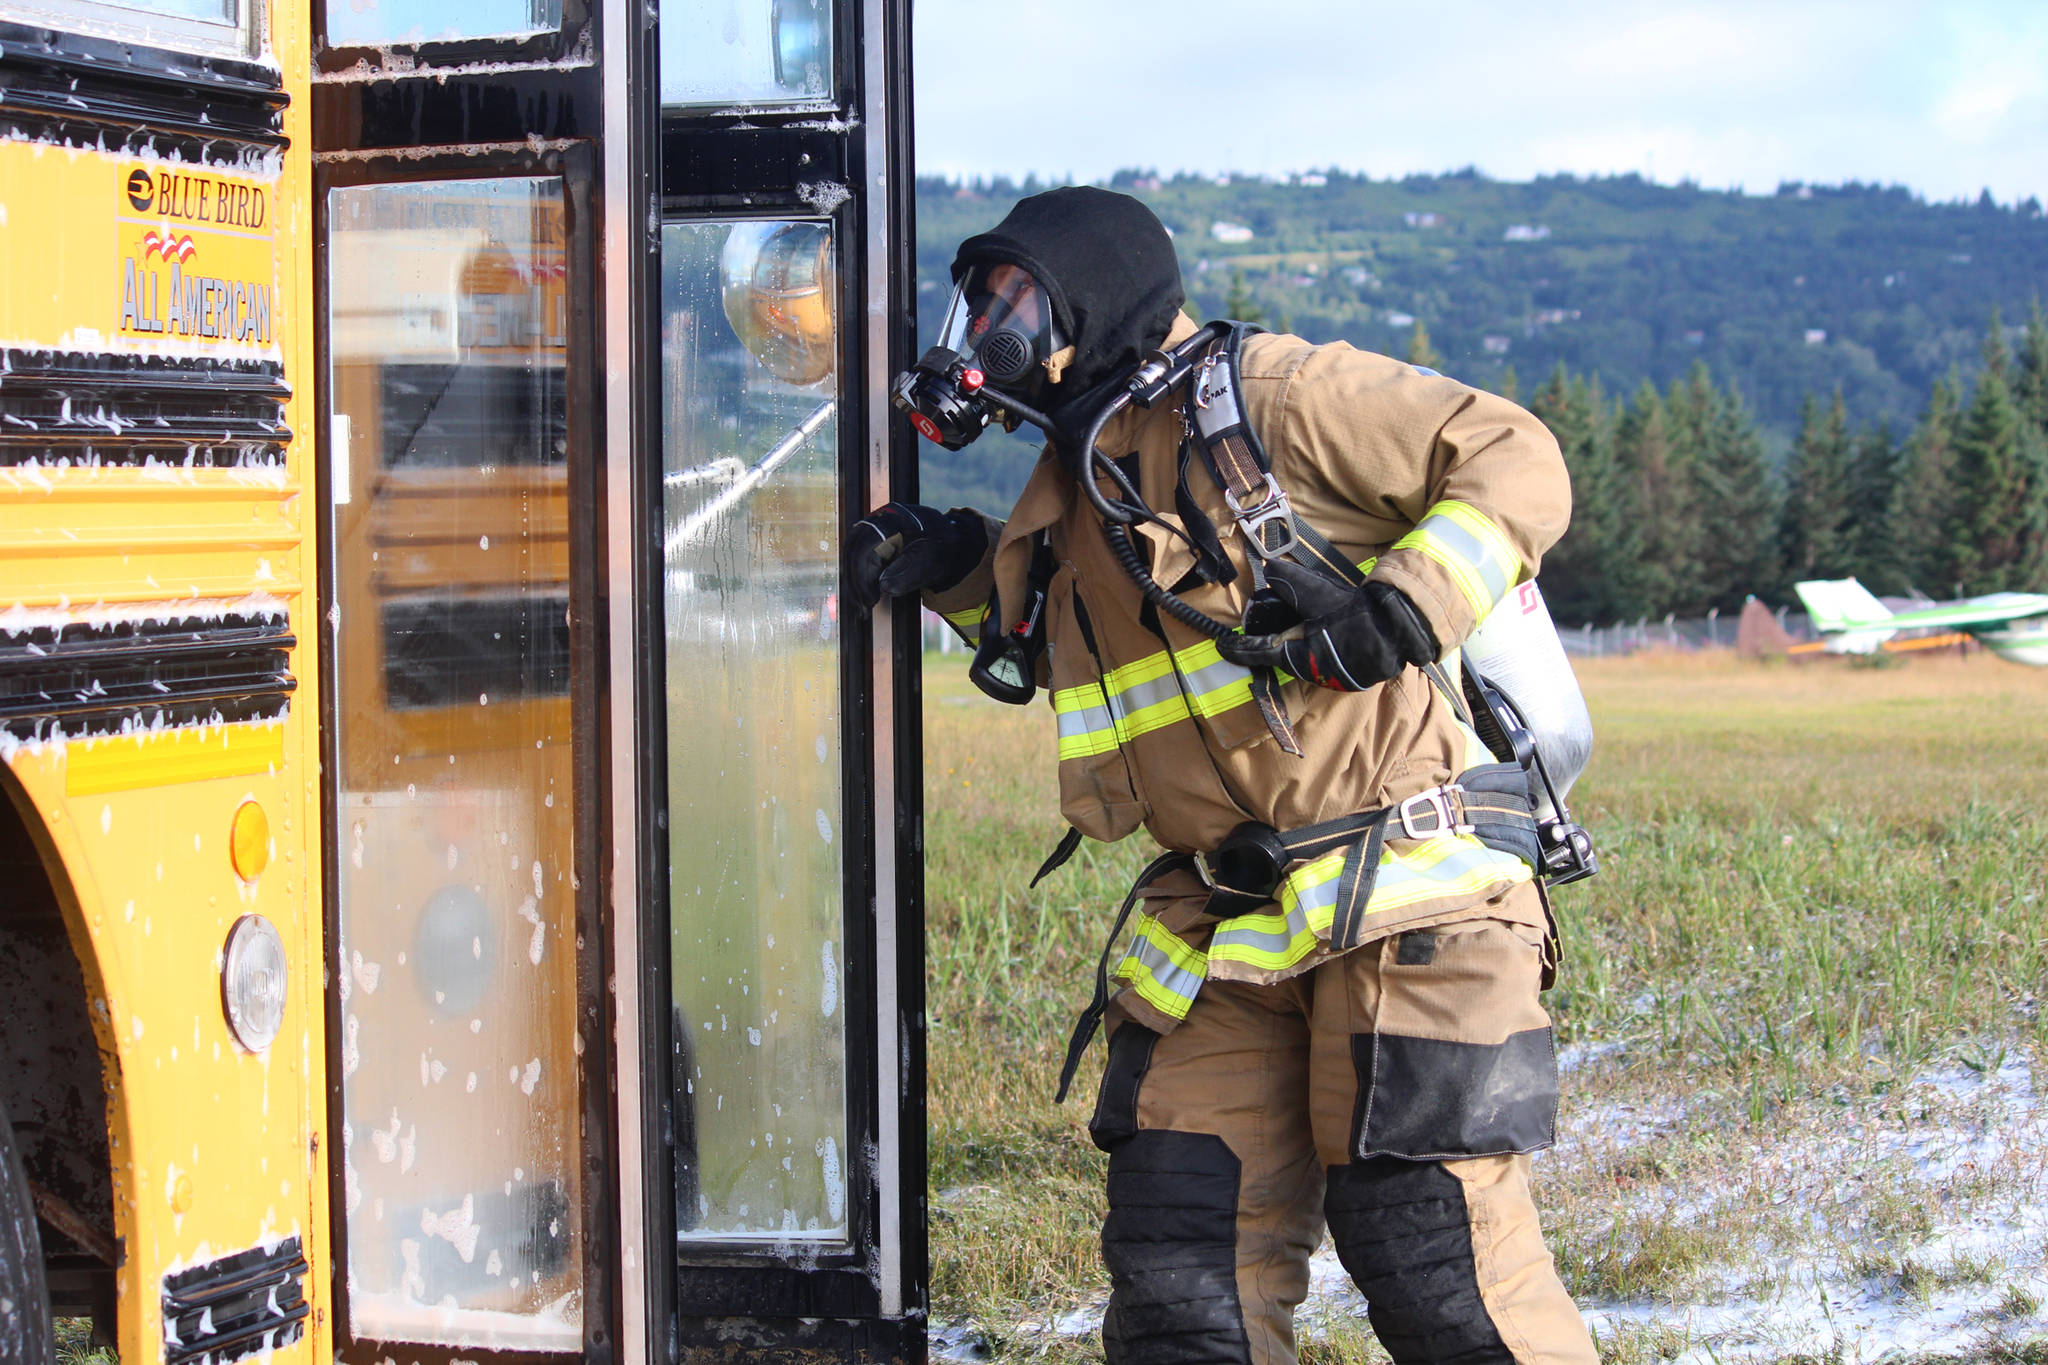 Firefighter Jesse Sherwood peers into a bus used as a crashed plane after spraying it down with foam during a simulated plane crash exercise Saturday, Aug. 19, 2017 at the Homer Airport in Homer, Alaska. He and members of several area emergency response agencies, along with airport personnel, completed the drill with the help of more than 20 volunteer “victims.” The drill is required every three years for the airport to stay in Federal Aviation Administration compliance. (Photo by Megan Pacer/Homer News)